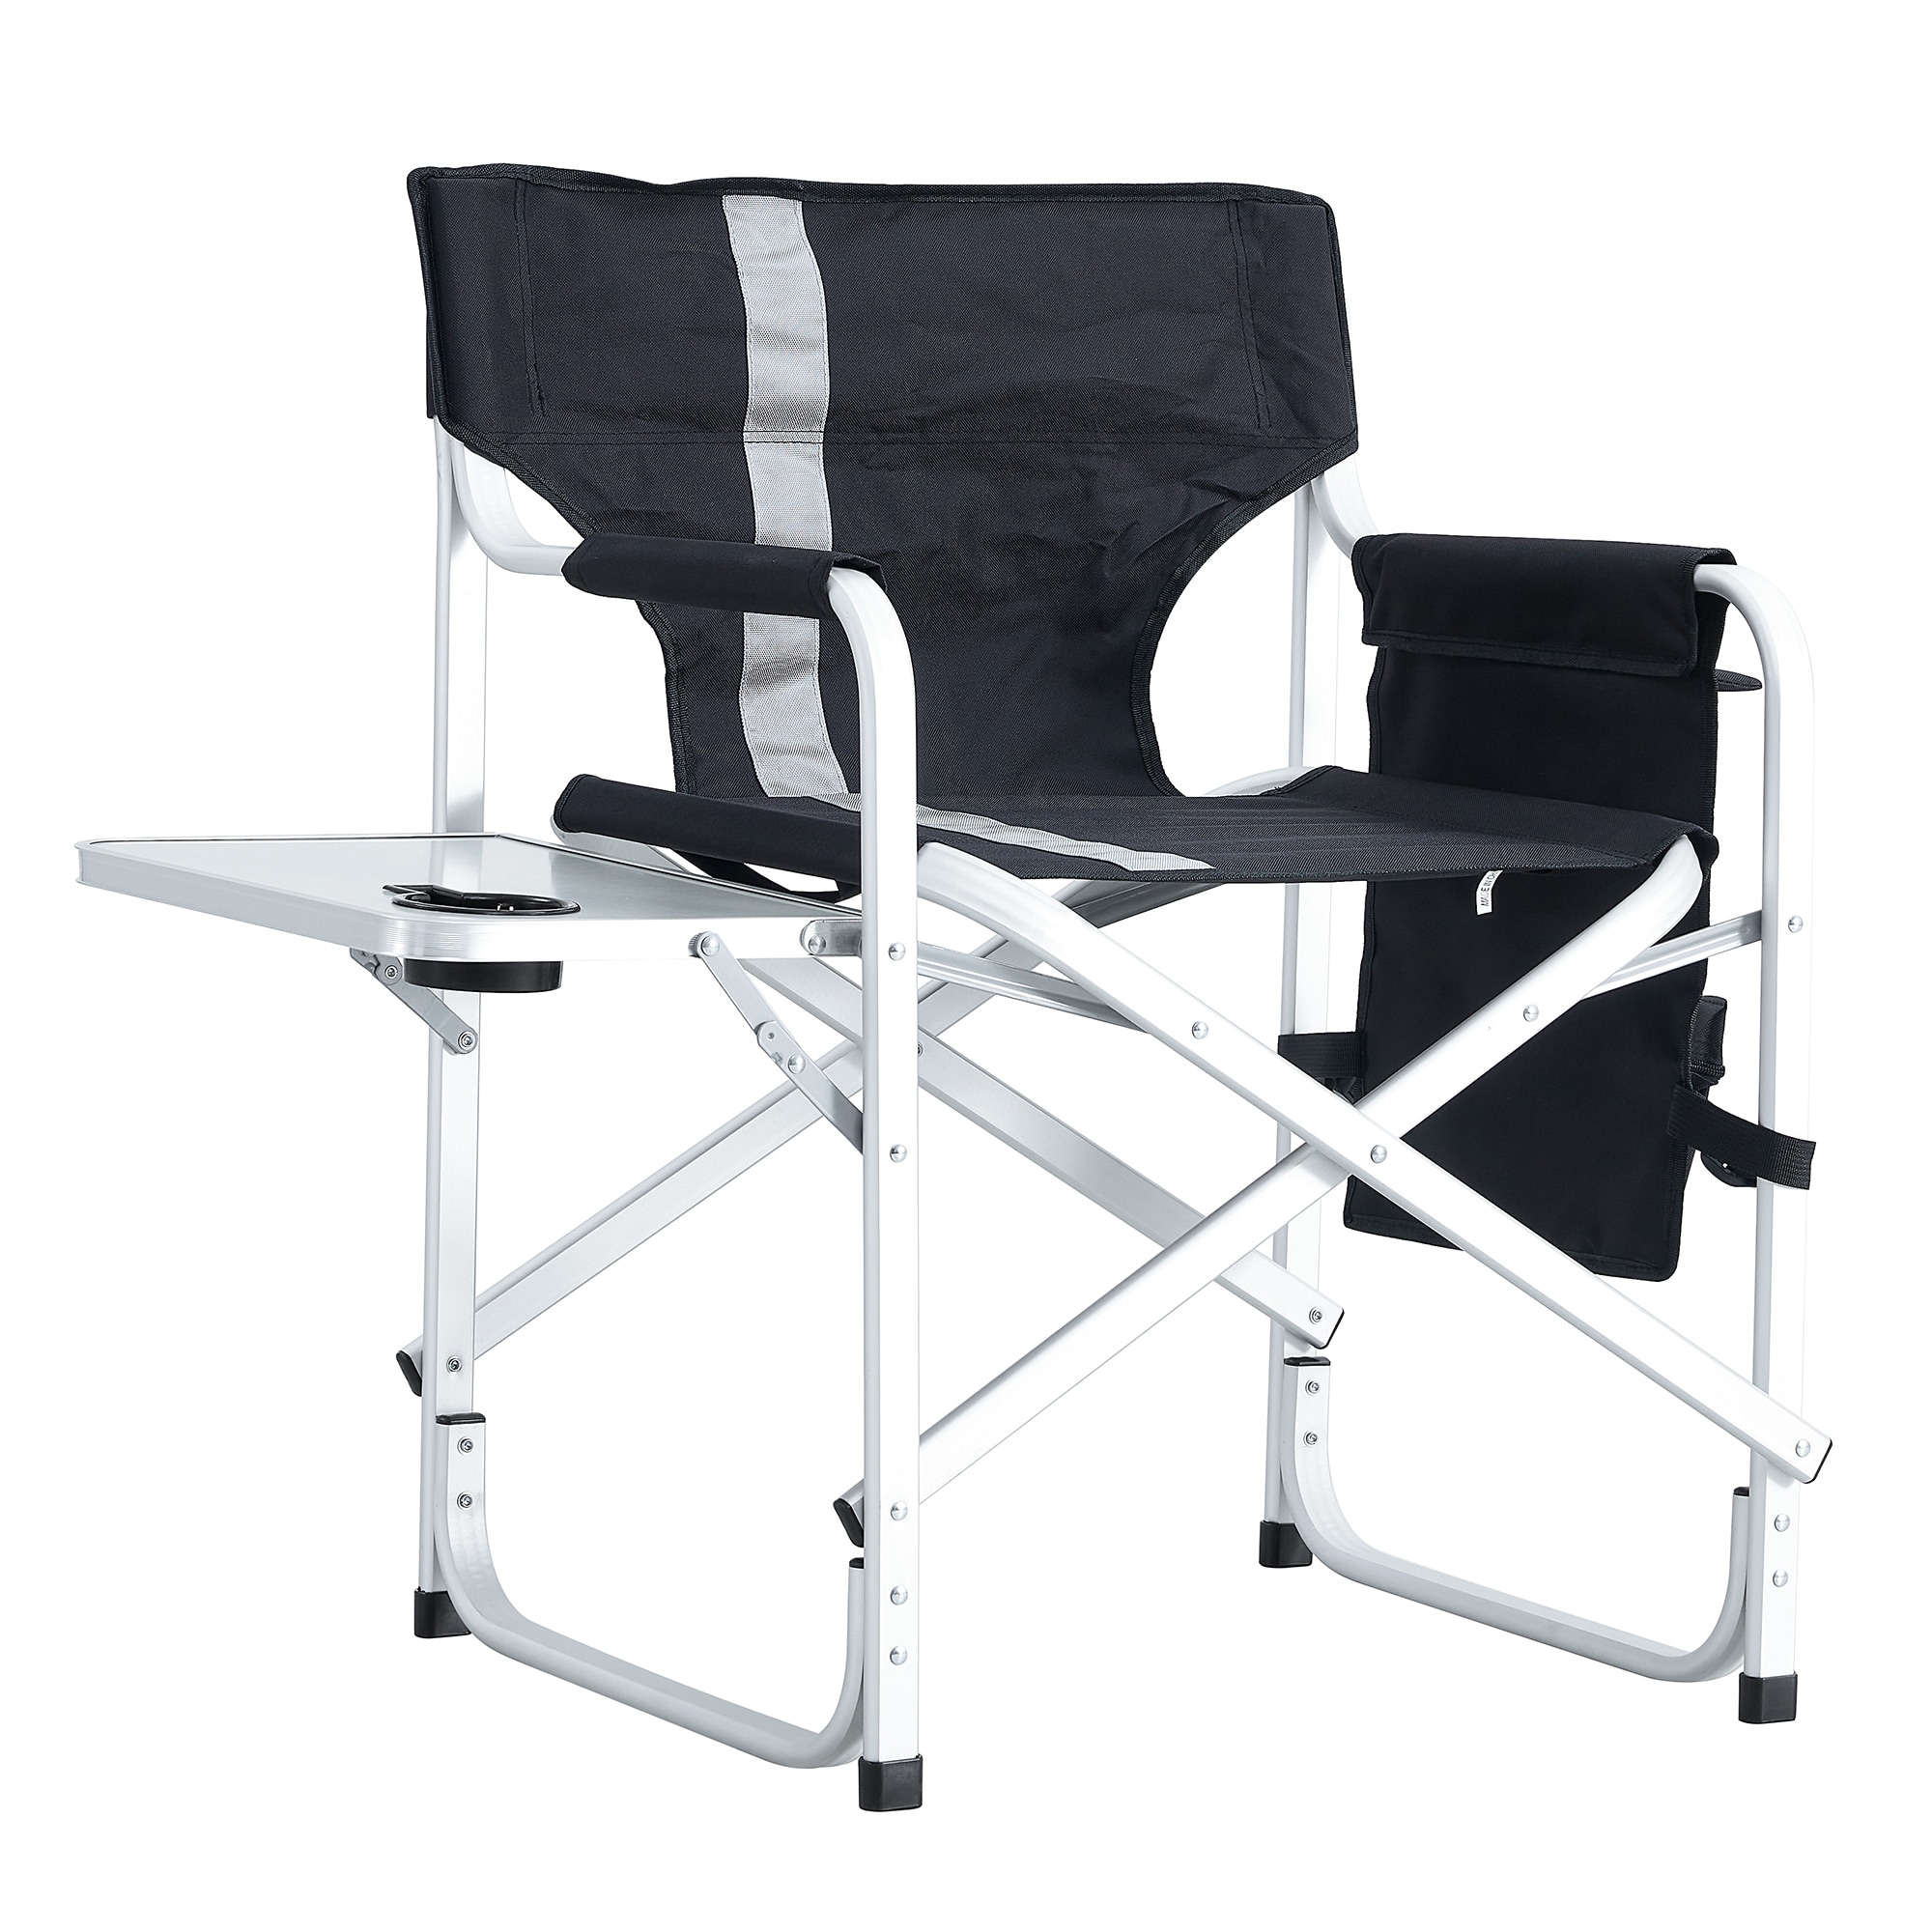 Padded Folding Outdoor Chair With Side Table and Storage Pockets  Ergonomic Design  Portable Chair For Camping  Picnics and Fishing